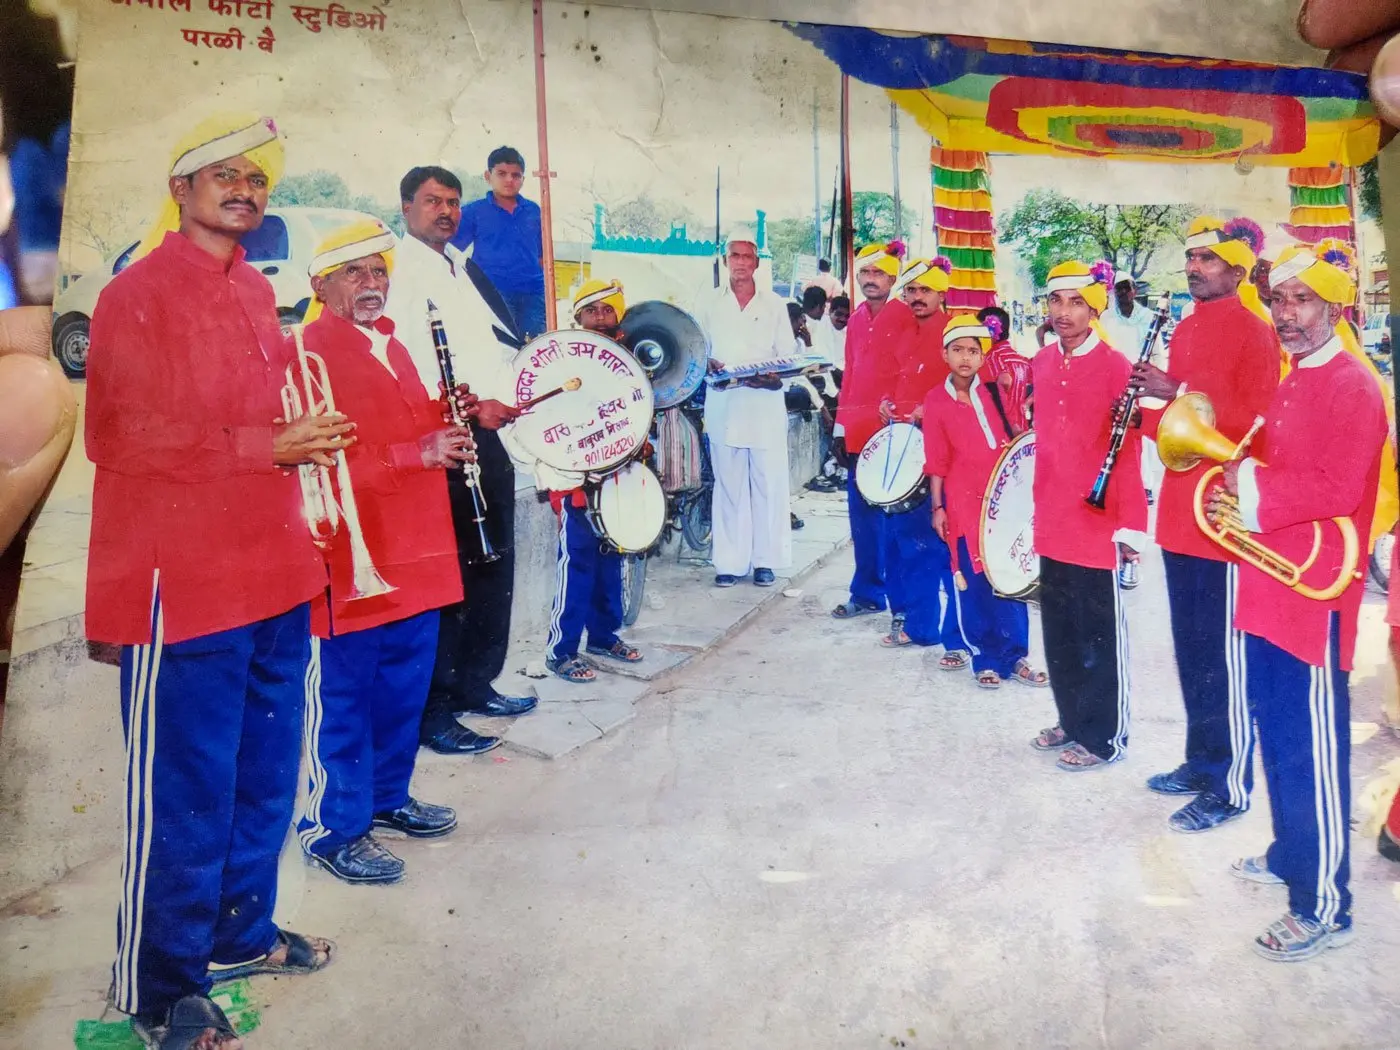 Band members in rural India holding instruments 